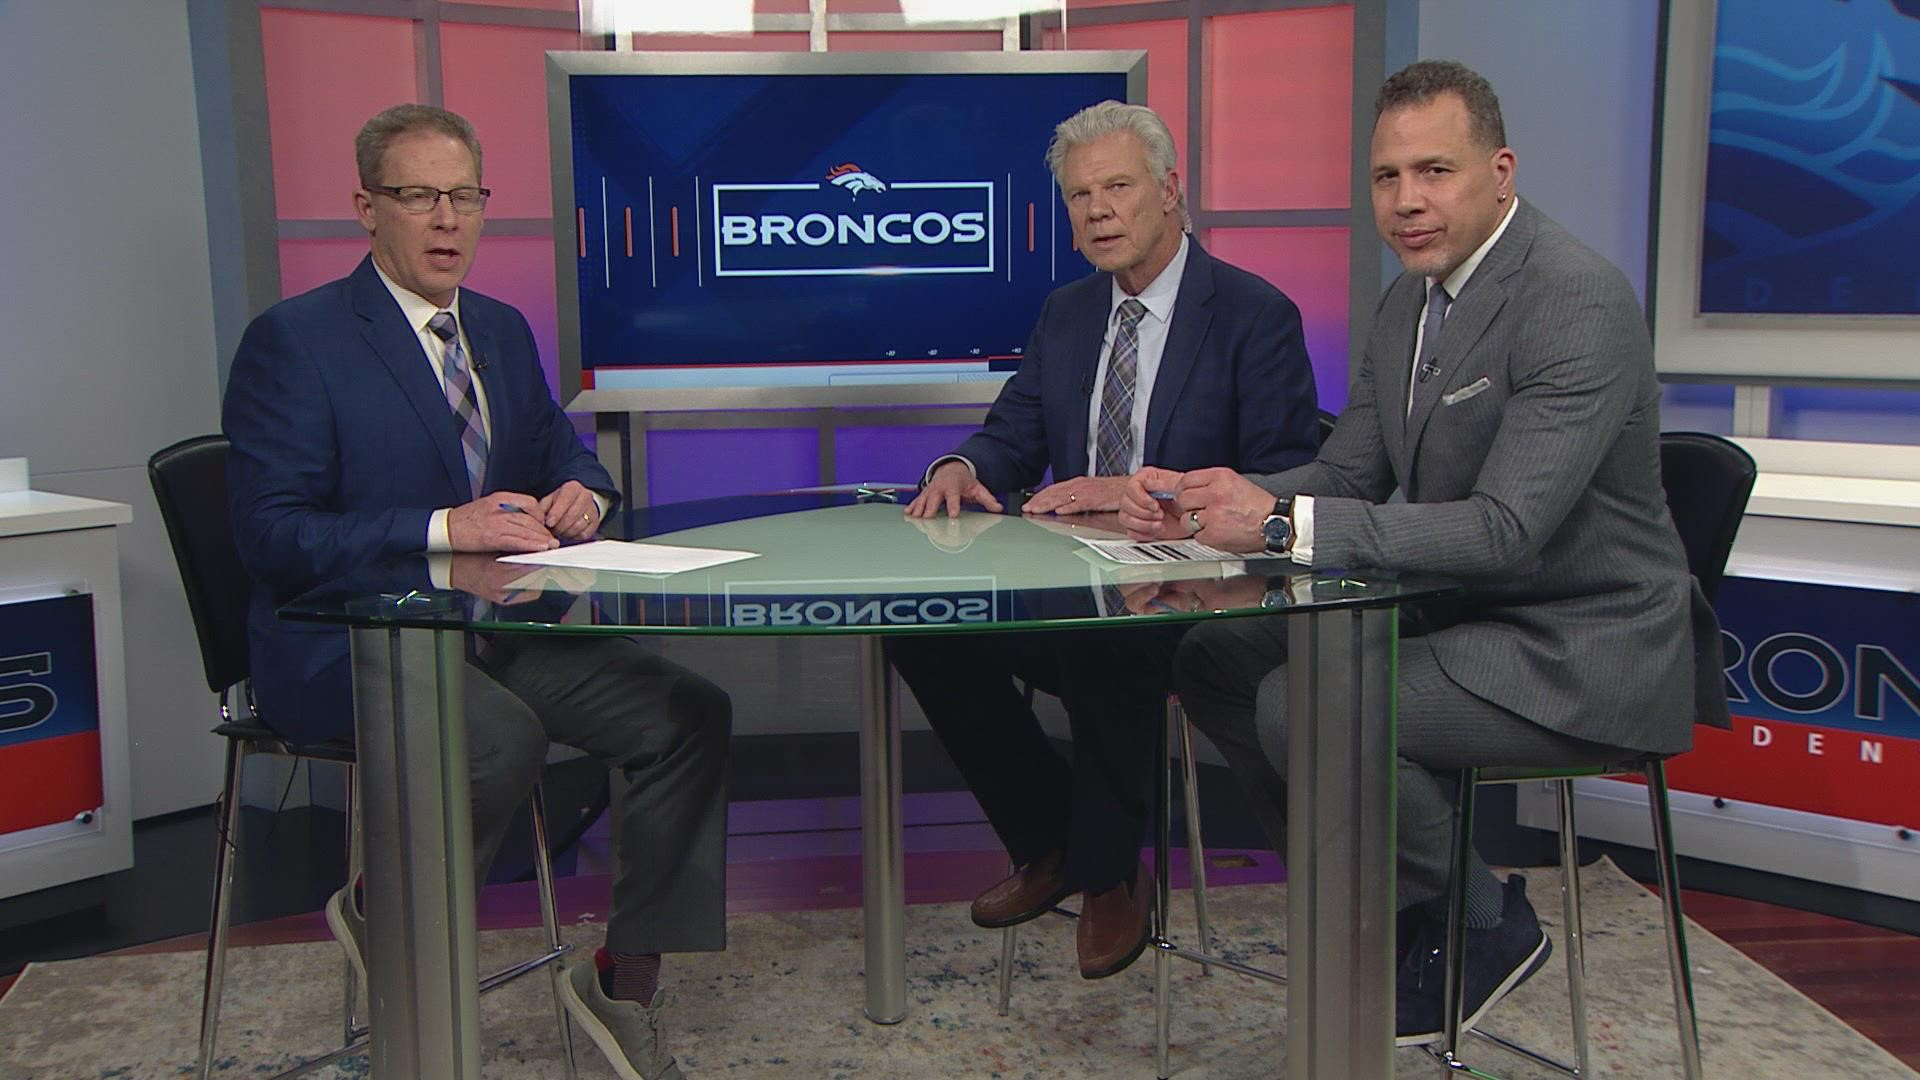 Rod Mackey, Mike Klis and Chad Brown discuss the Denver Broncos' 27-24 loss to the Kansas City Chiefs in Week 17.